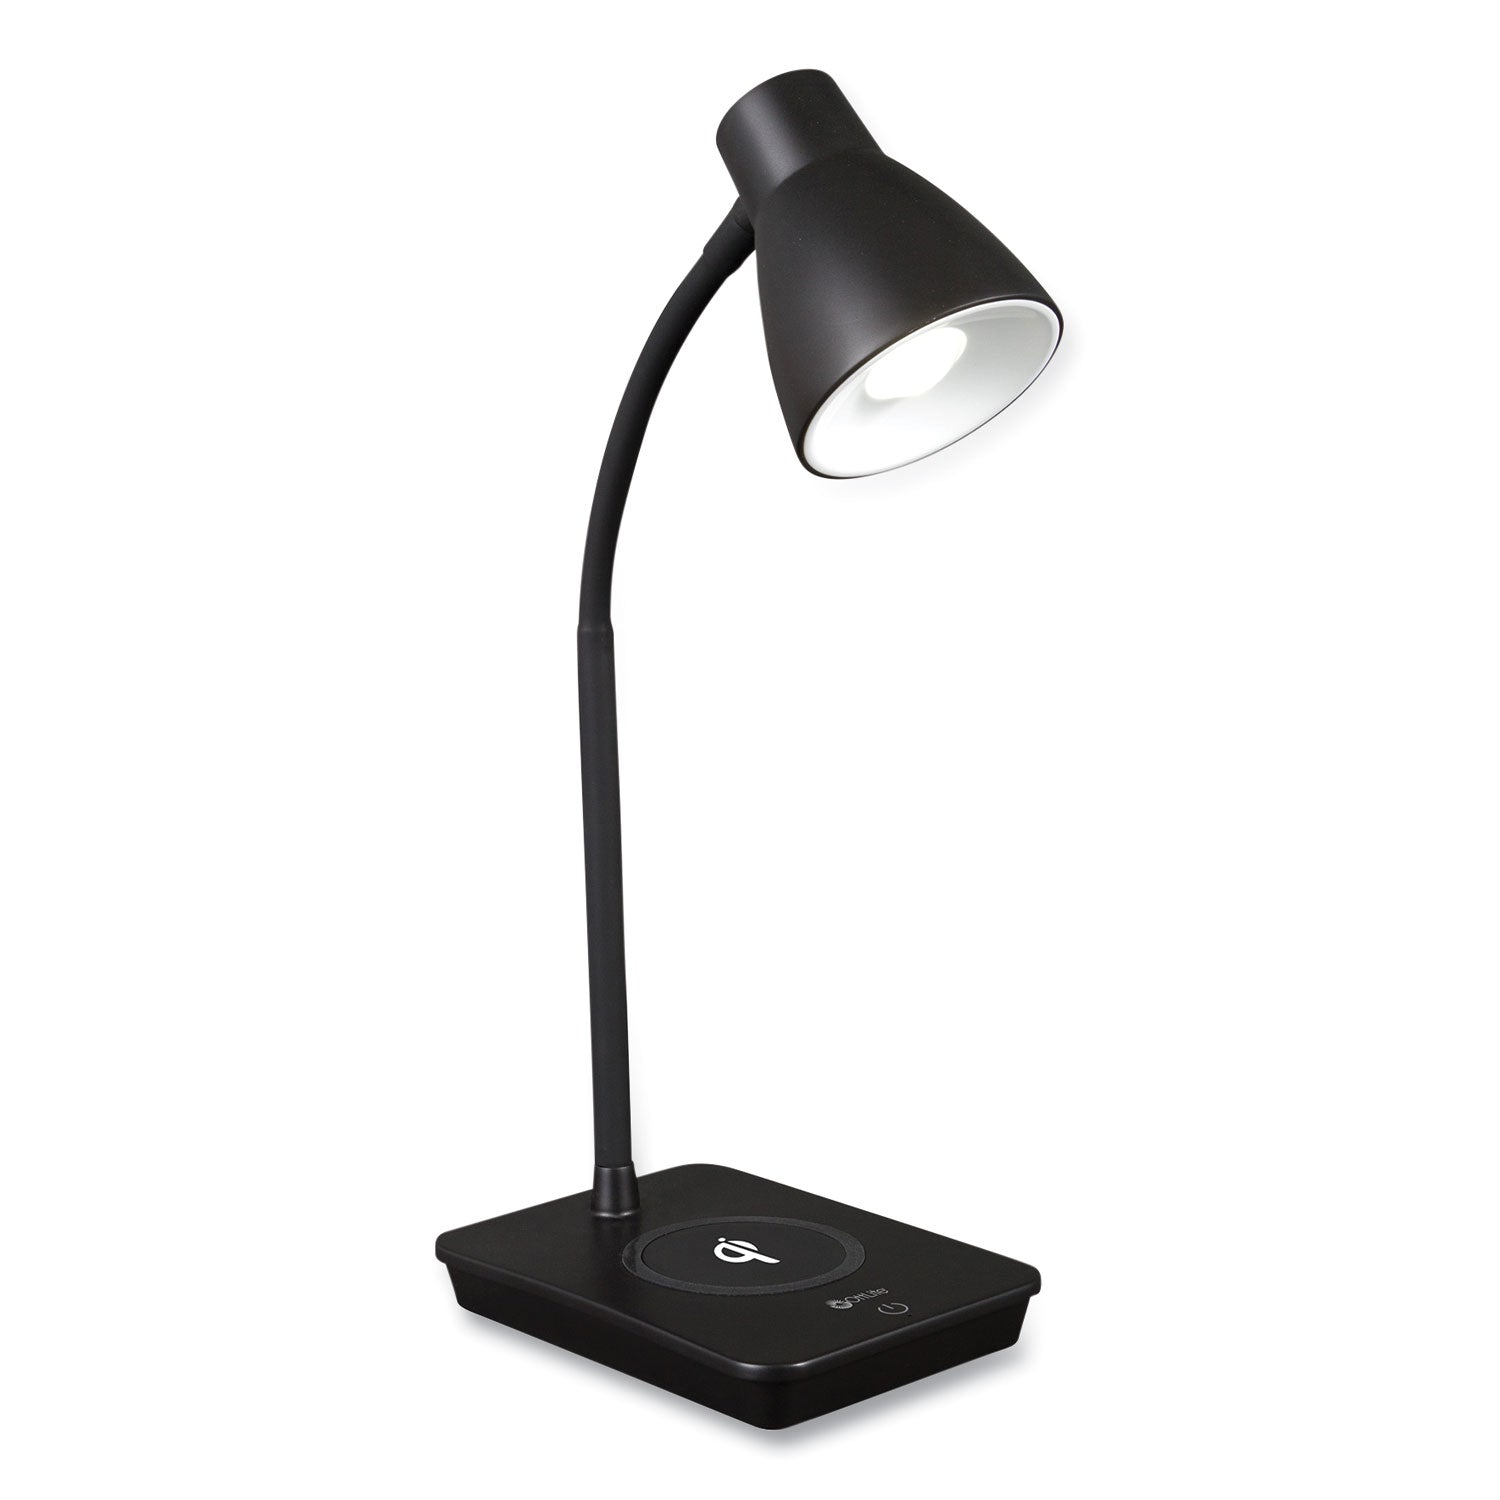 wellness-series-infuse-led-desk-lamp-with-wireless-and-usb-charging-155-high-black-ships-in-4-6-business-days_ottcsa26kuqshpr - 1